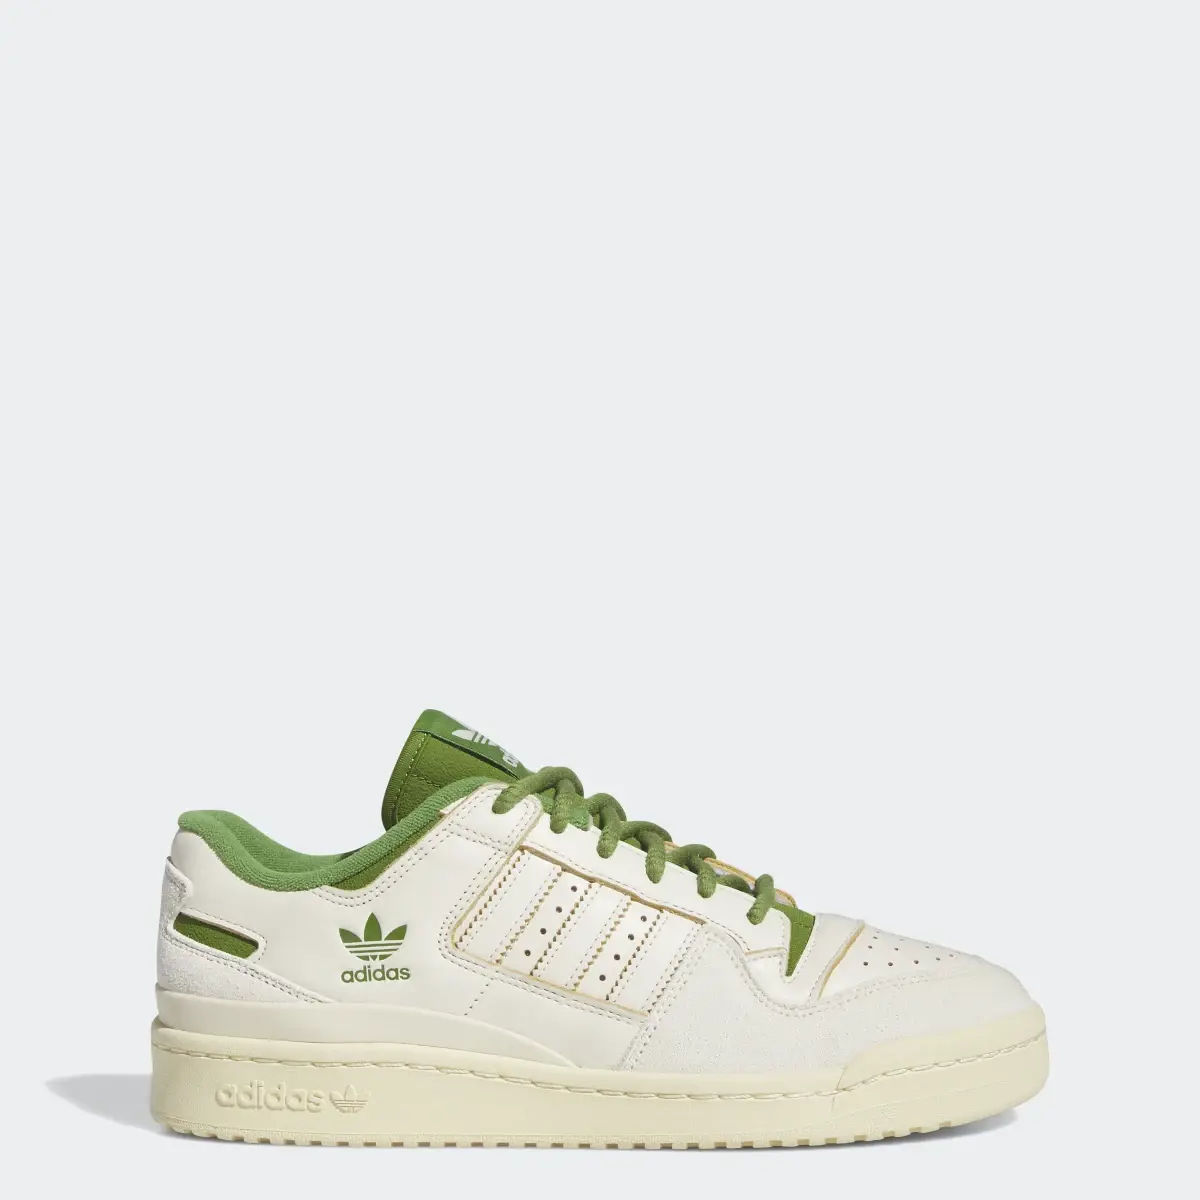 Adidas Forum 84 Low Classic Shoes. 1